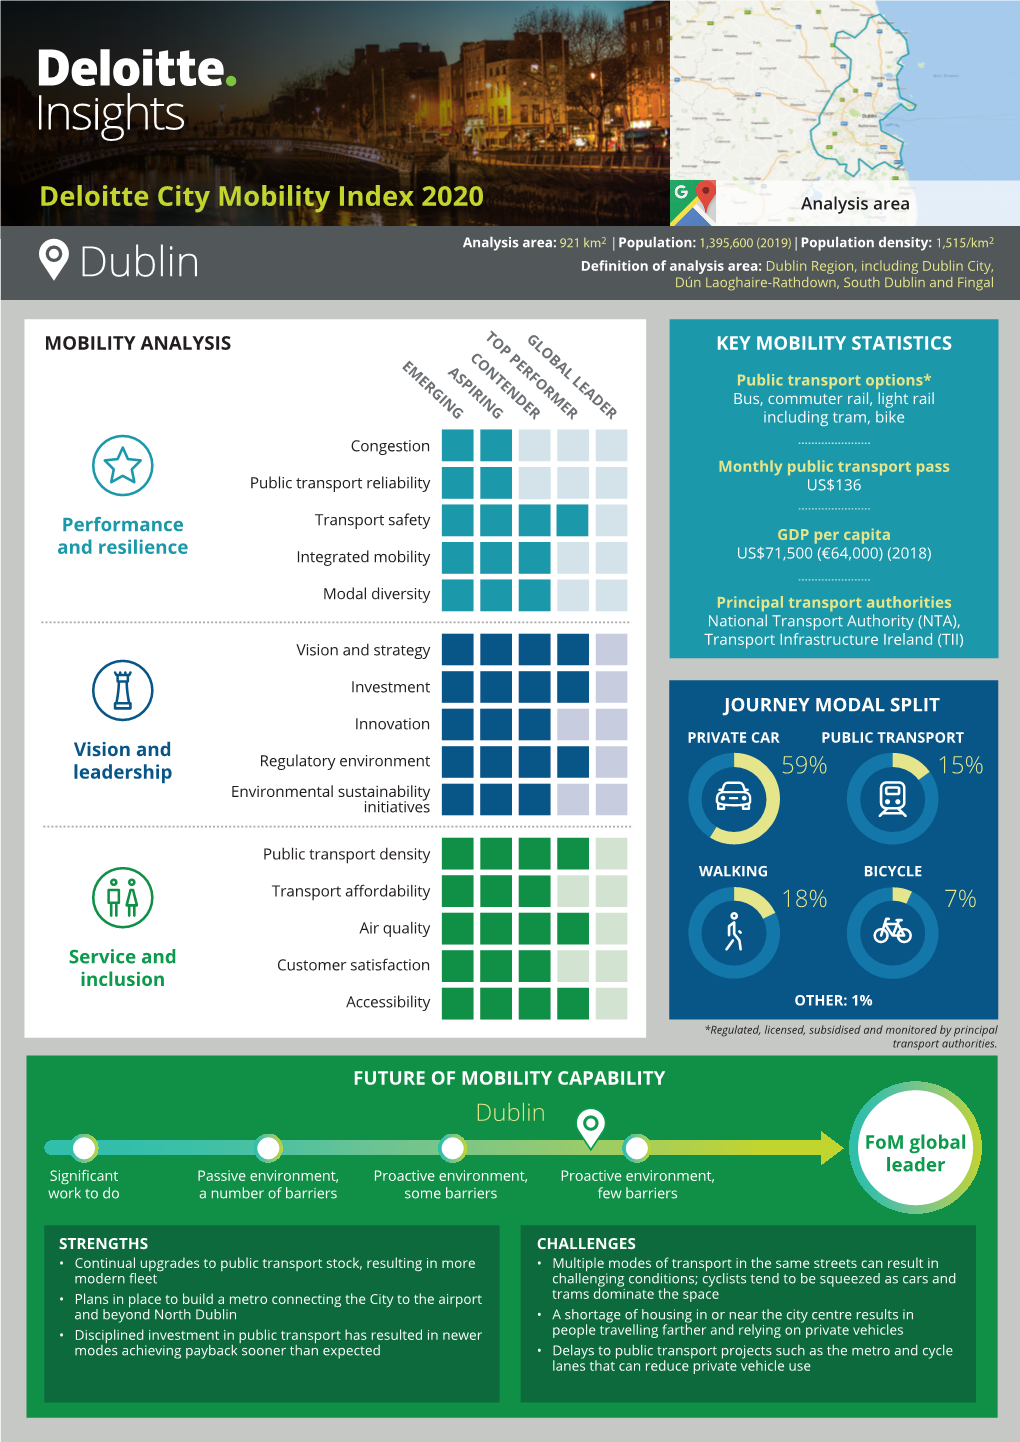 Deloitte City Mobility Index 2020 Analysis Area